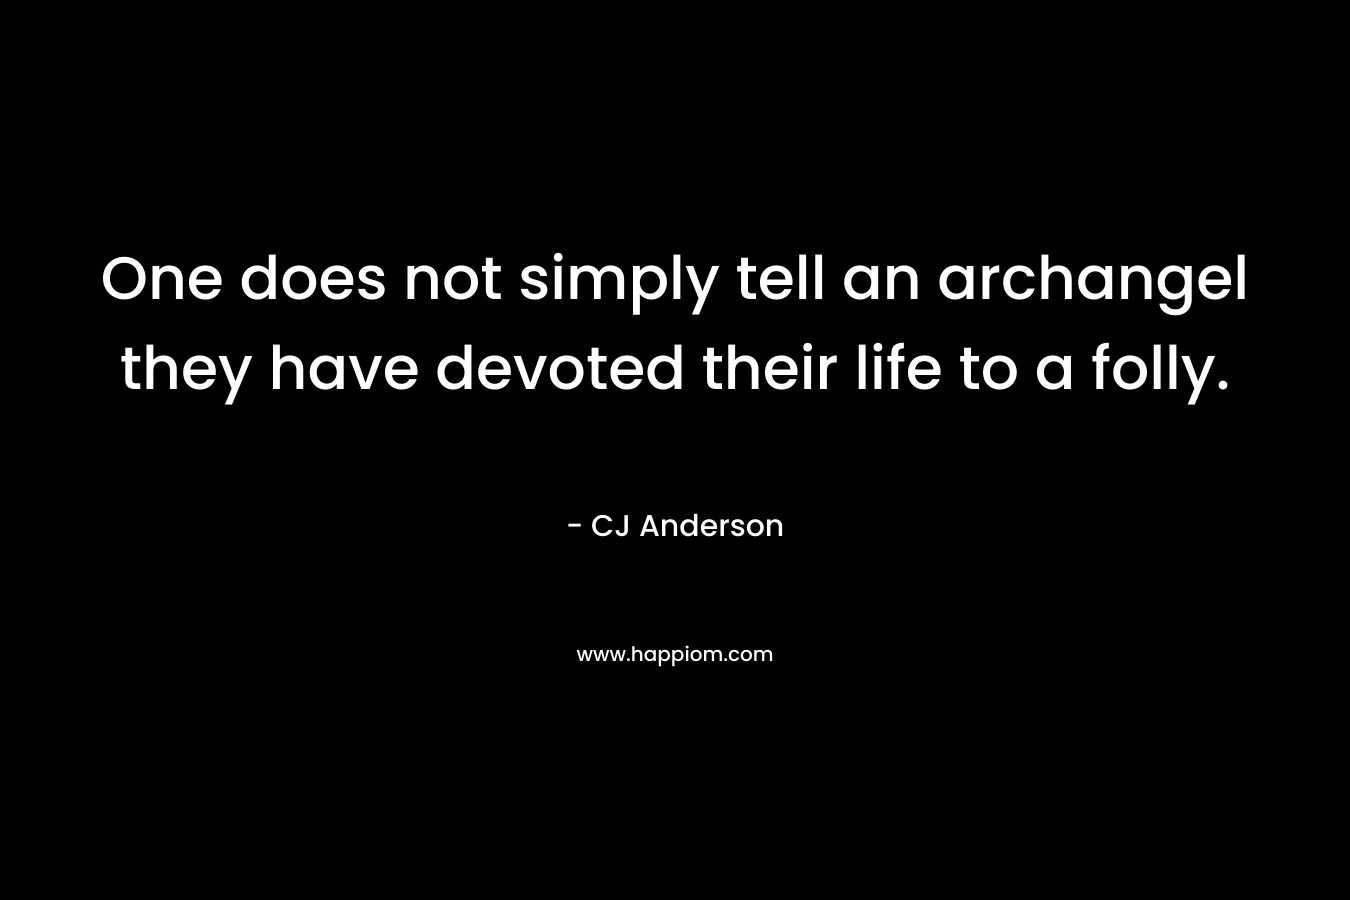 One does not simply tell an archangel they have devoted their life to a folly. – CJ Anderson